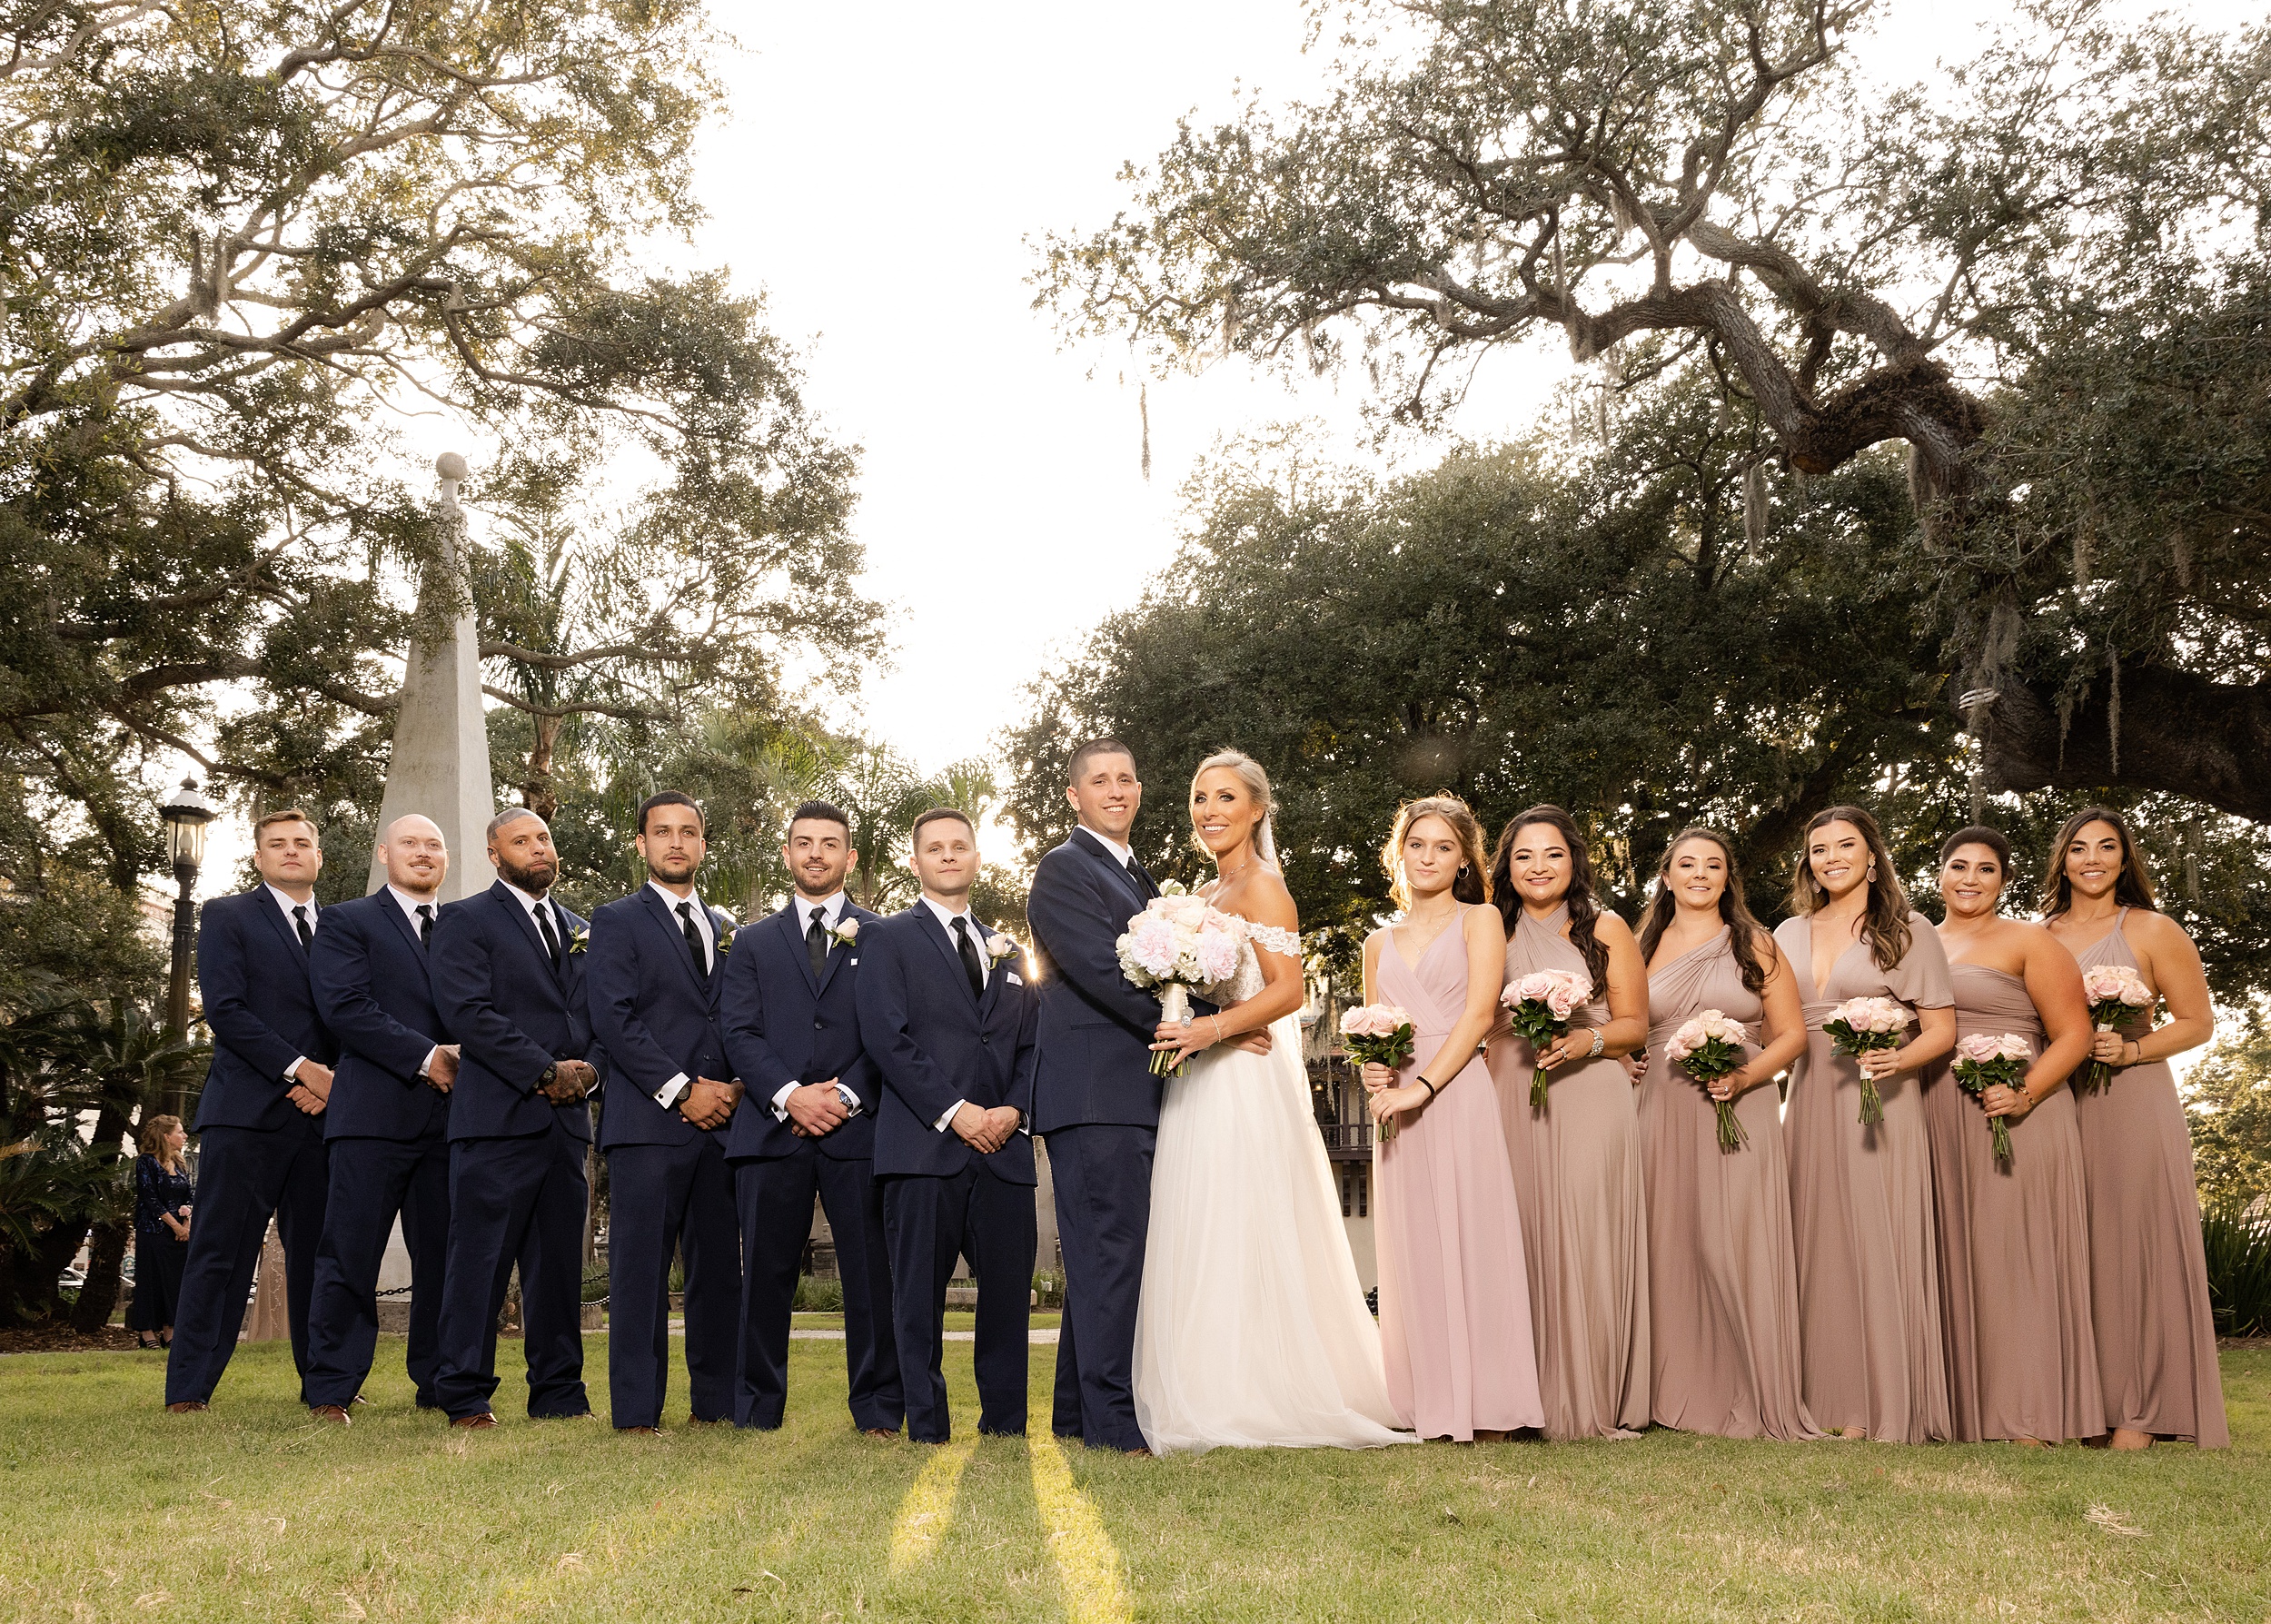 Newlyweds stand together while surrounded by their wedding party